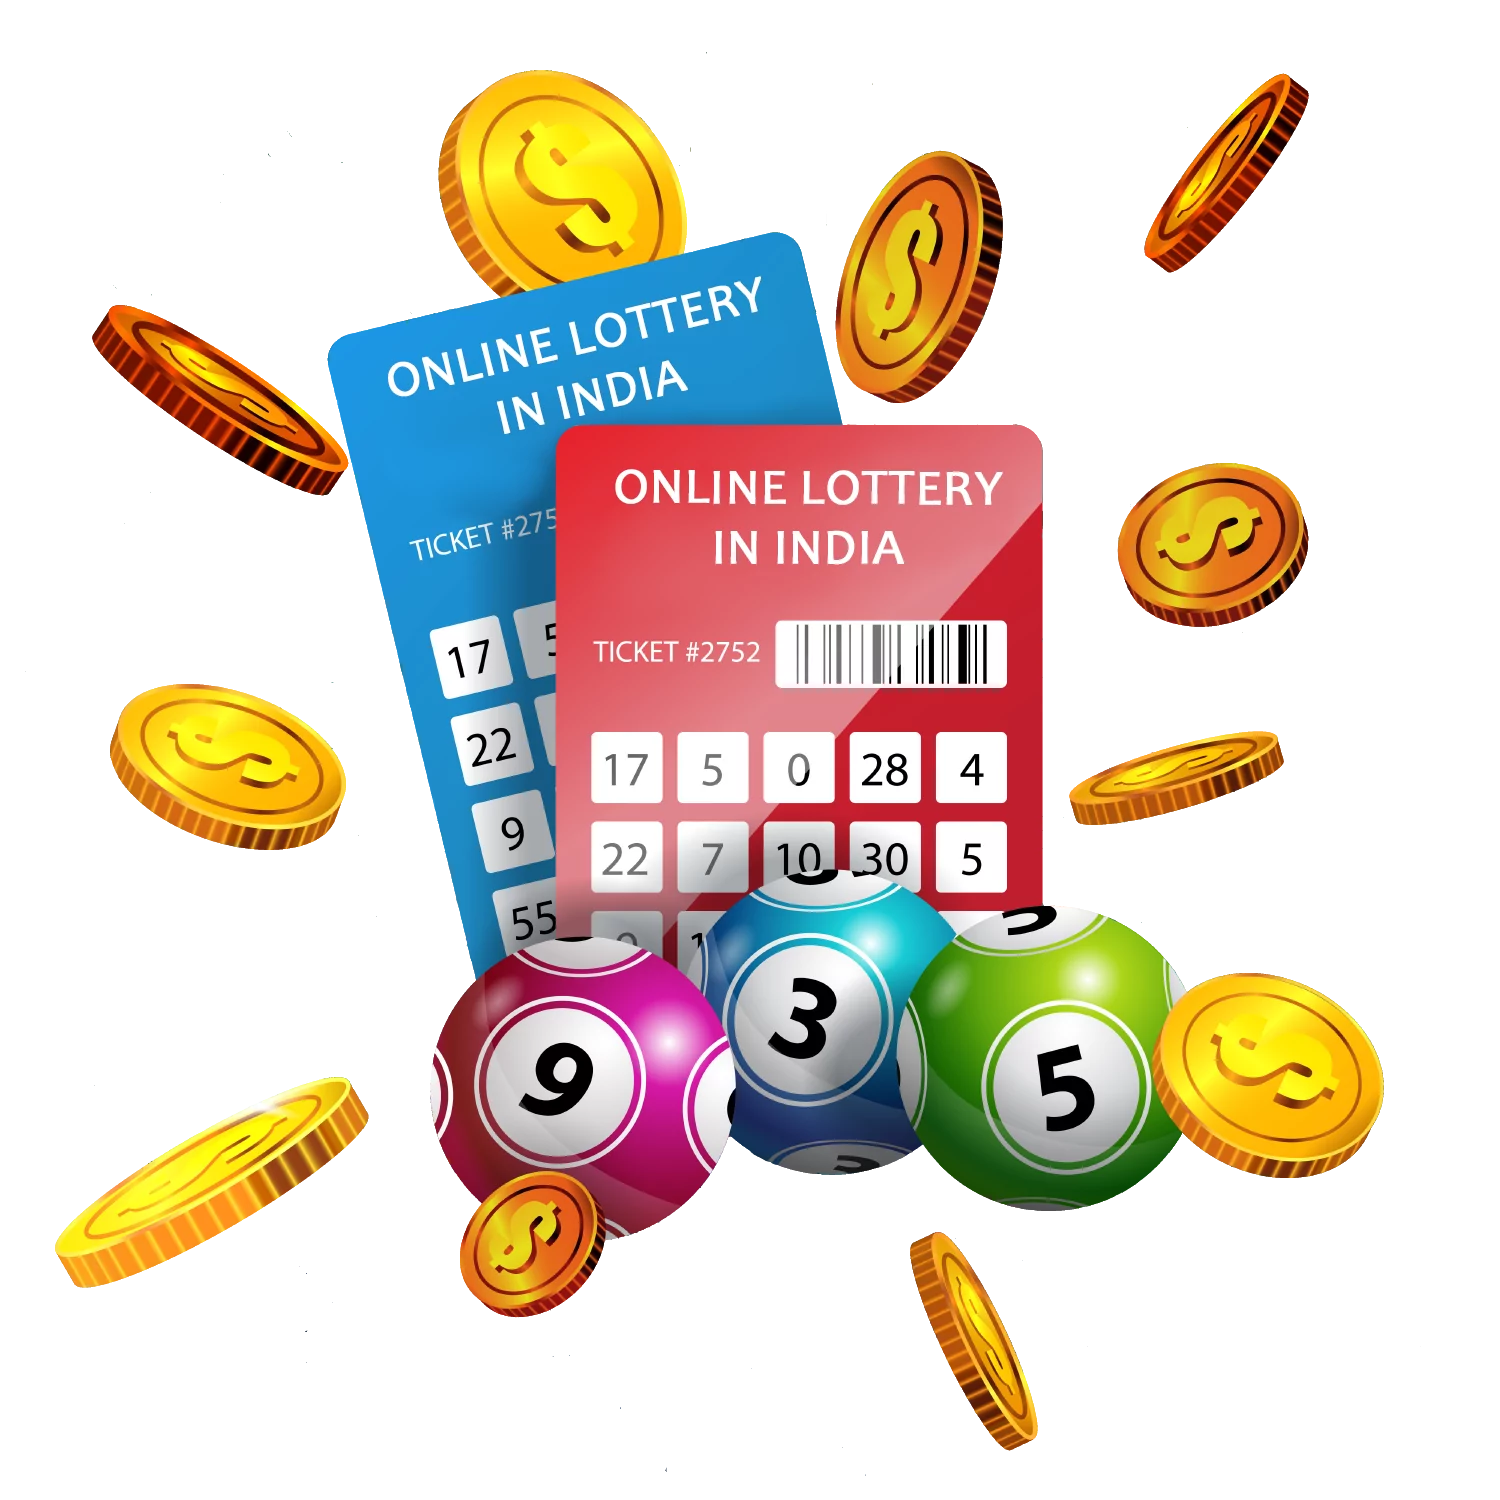 Find out all the information about online lotteries in India from the experts.